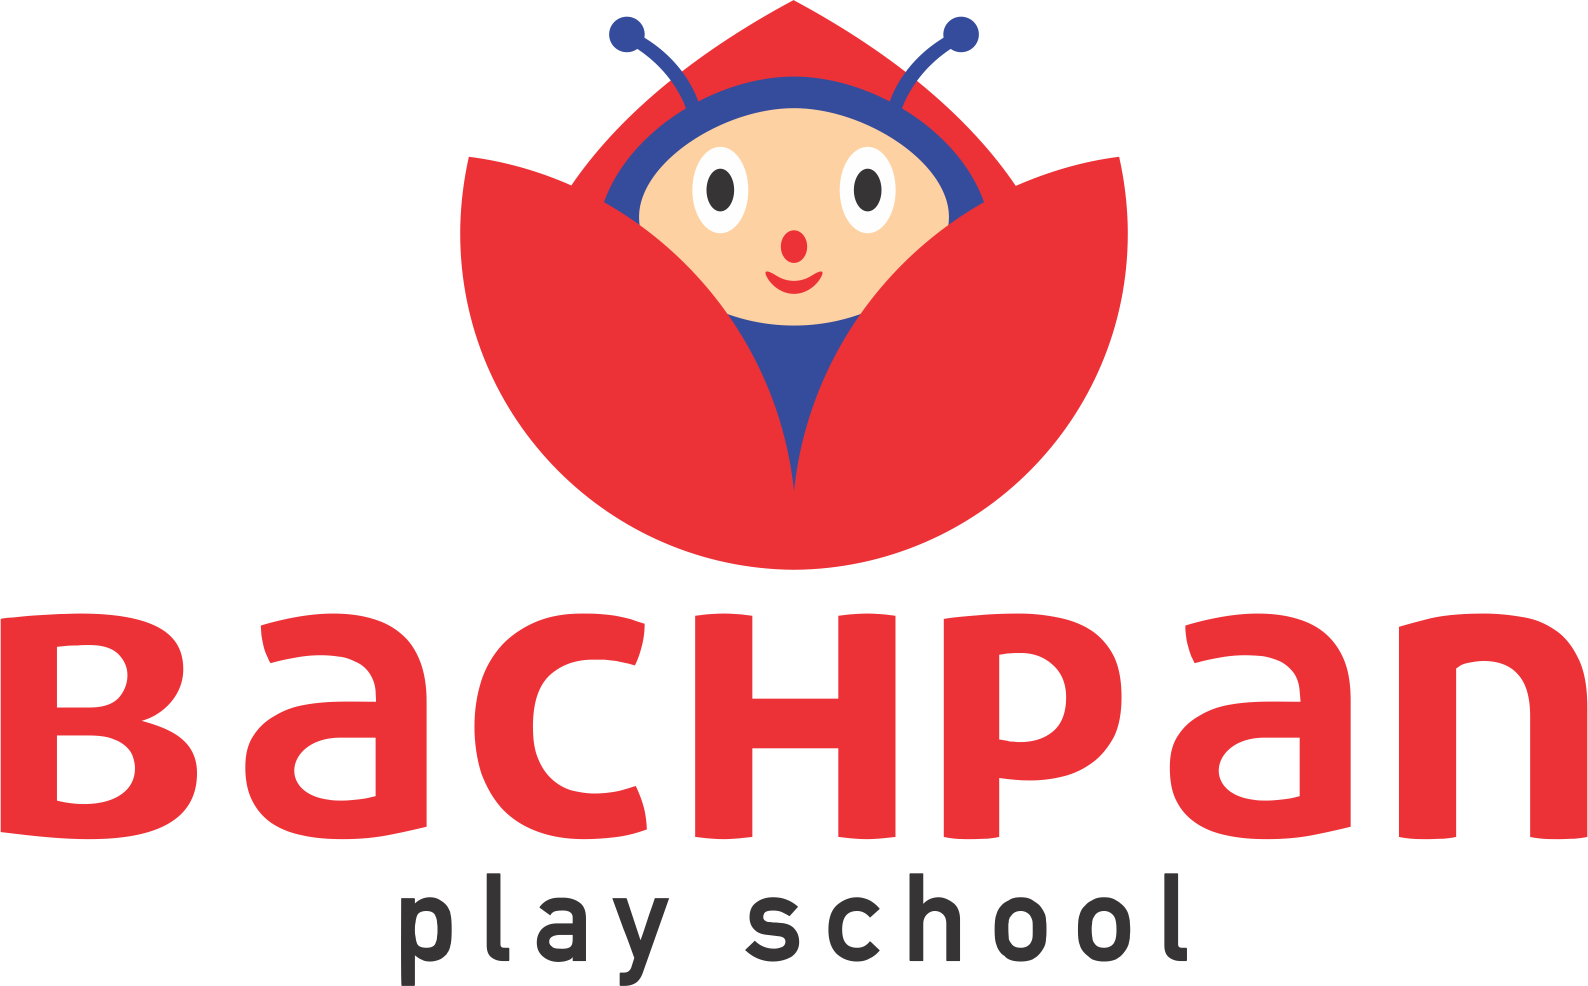 Bachpan Play School|Colleges|Education